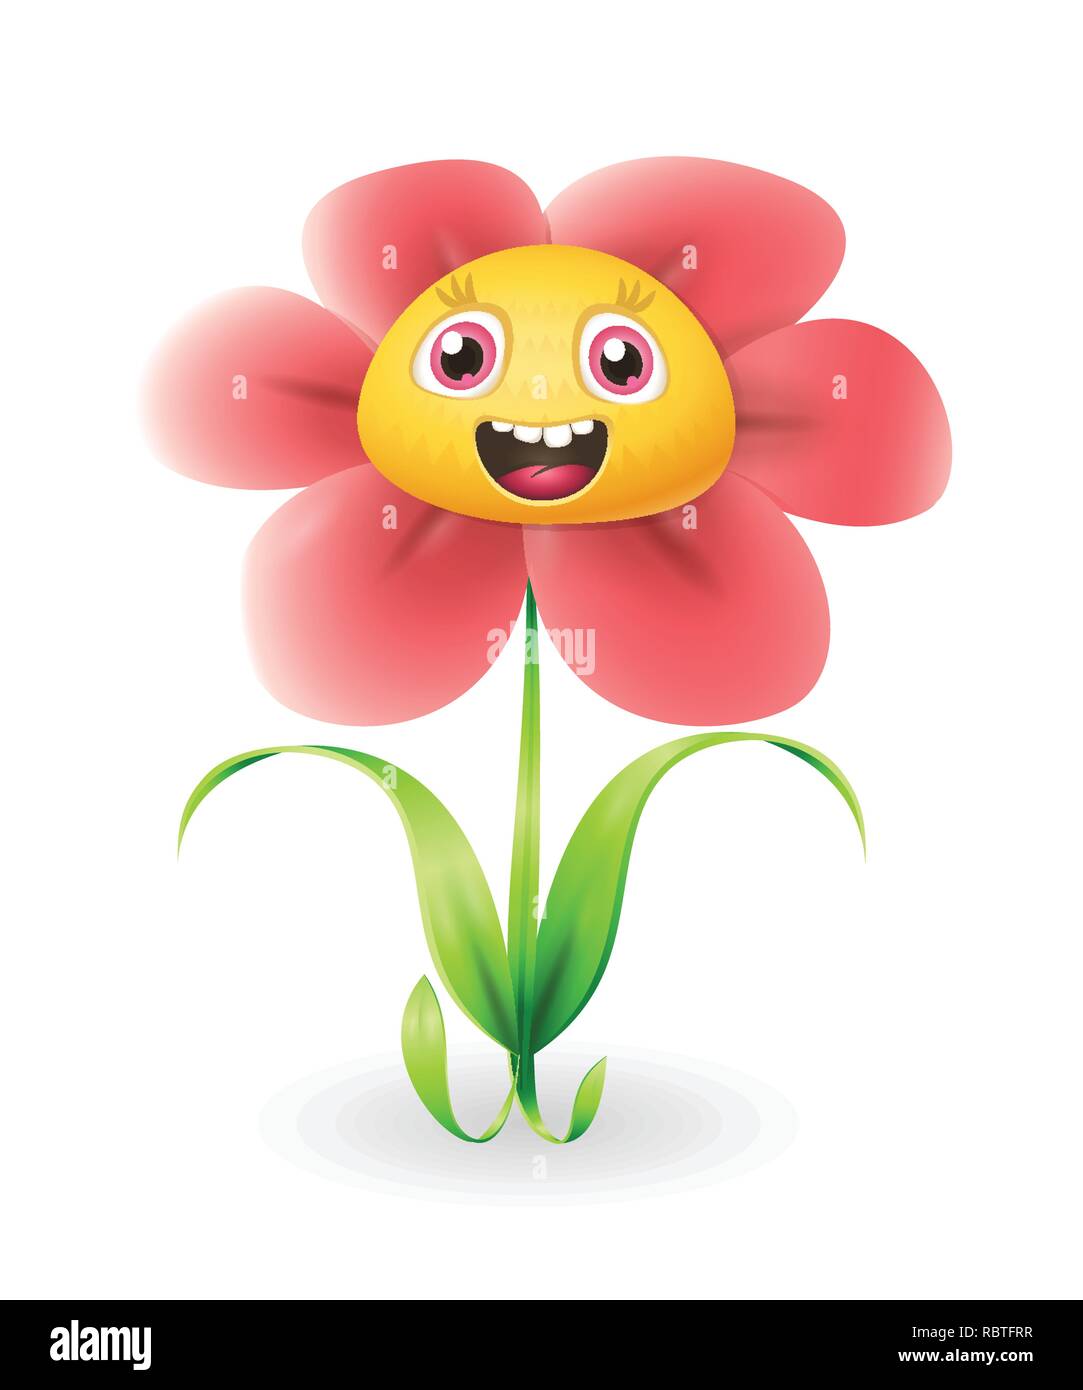 Smiley Flower Face Illustration High Resolution Stock Photography and